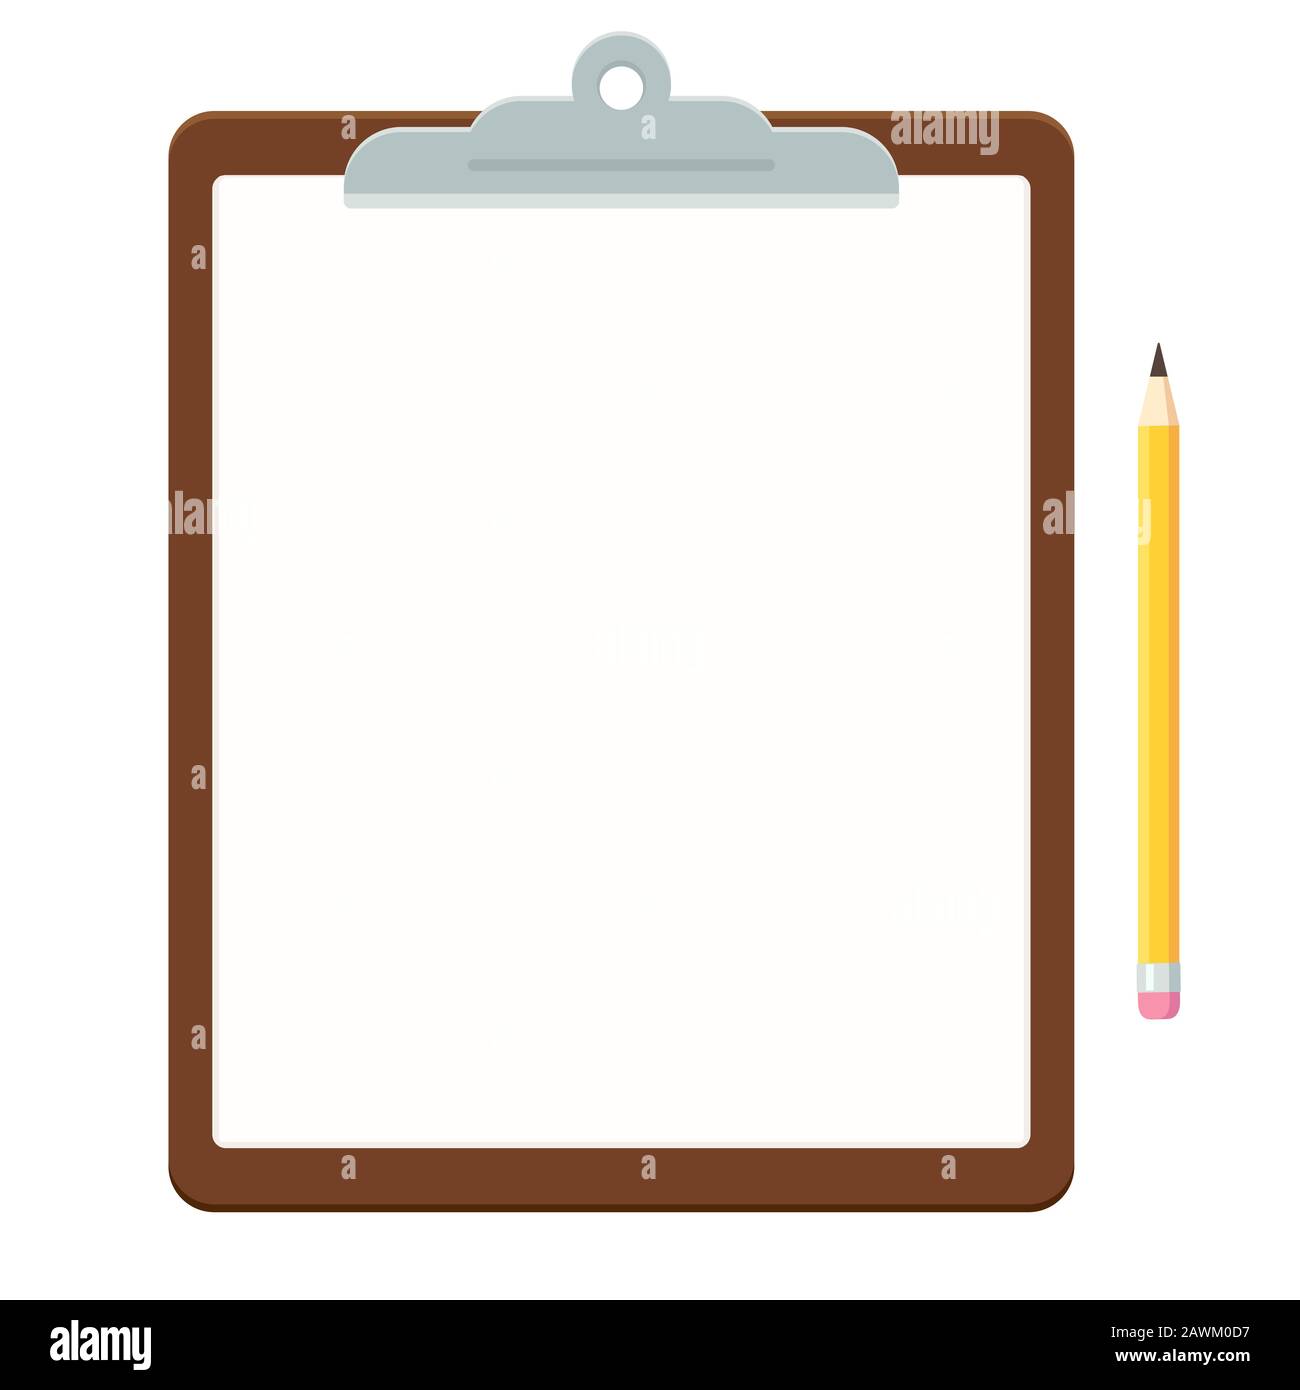 Clipboard with blank paper sheet and pencil. Office stationery in simple flat vector style, isolated clip art illustration. Stock Vector